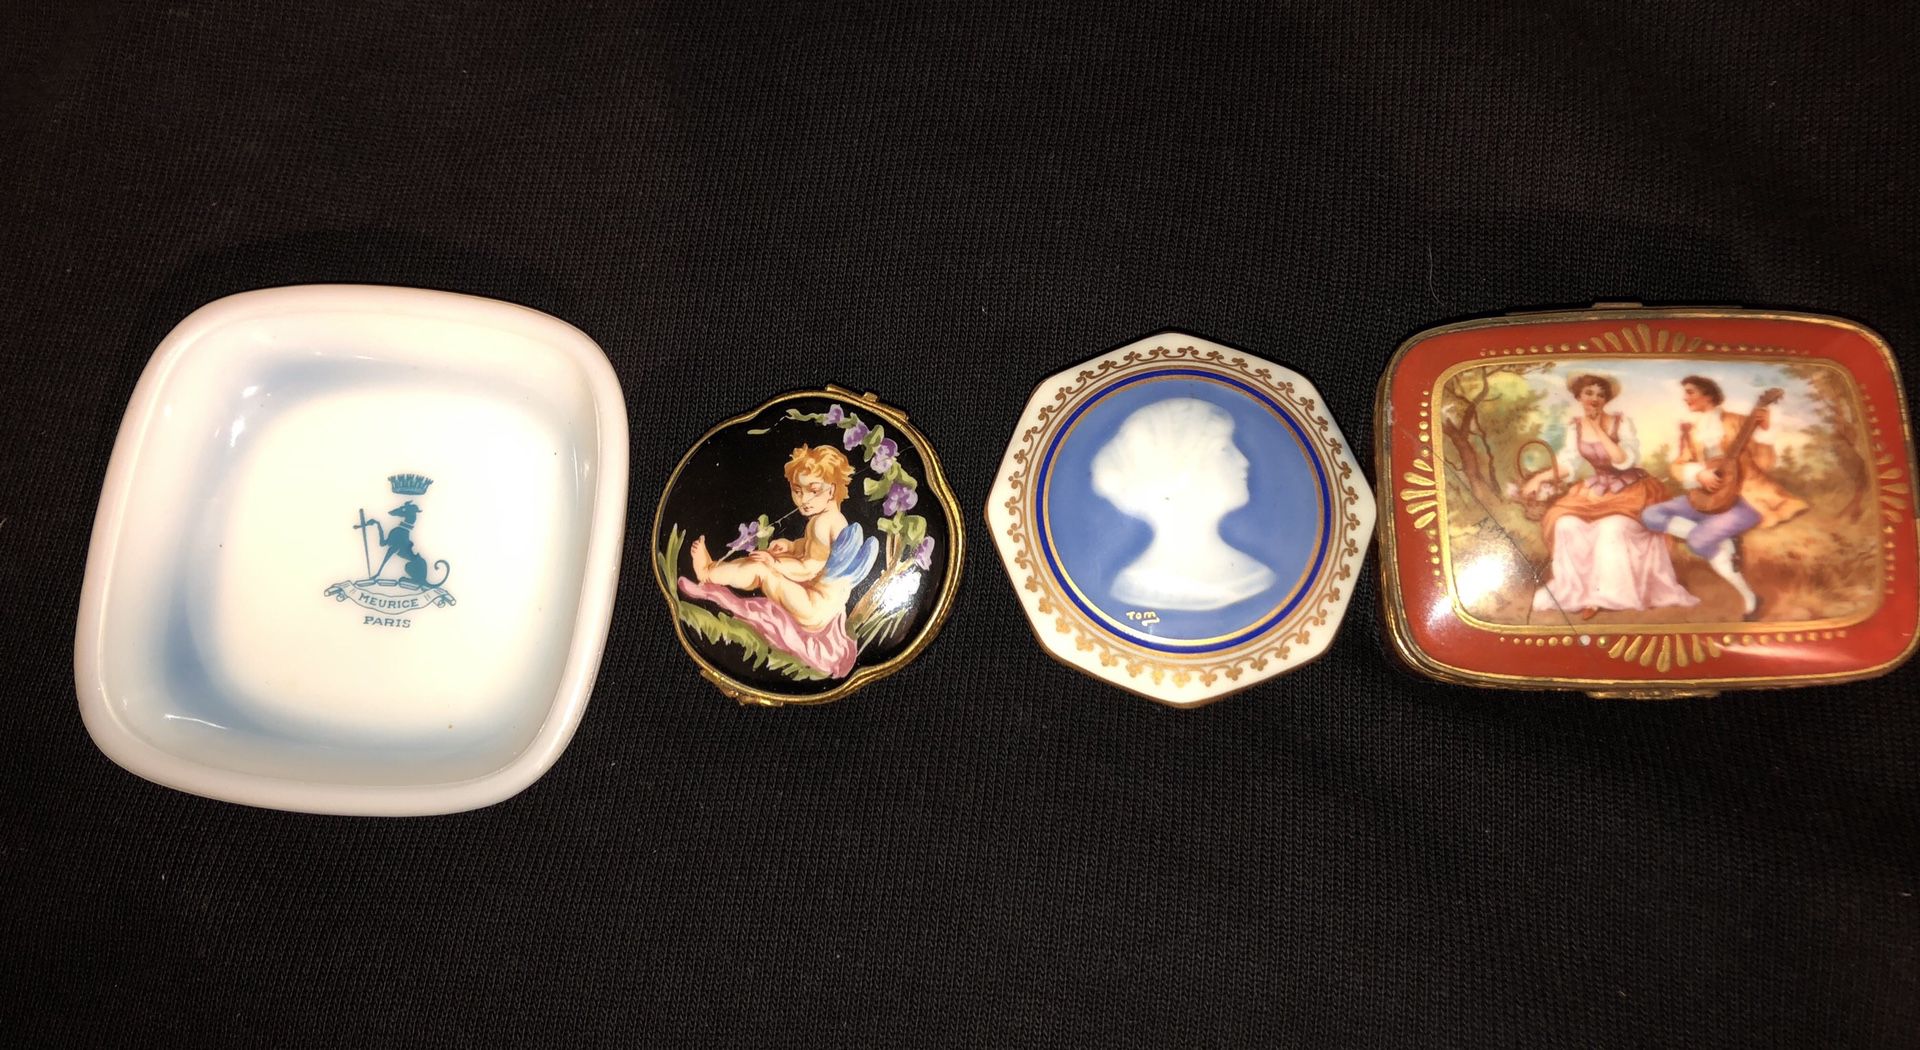 ALL 4 FRENCH ANTIQUES 1 MILK GLASS ASHTRAY & 3 FRENCH PORCELAIN LIMOGES TRINKET BOXES